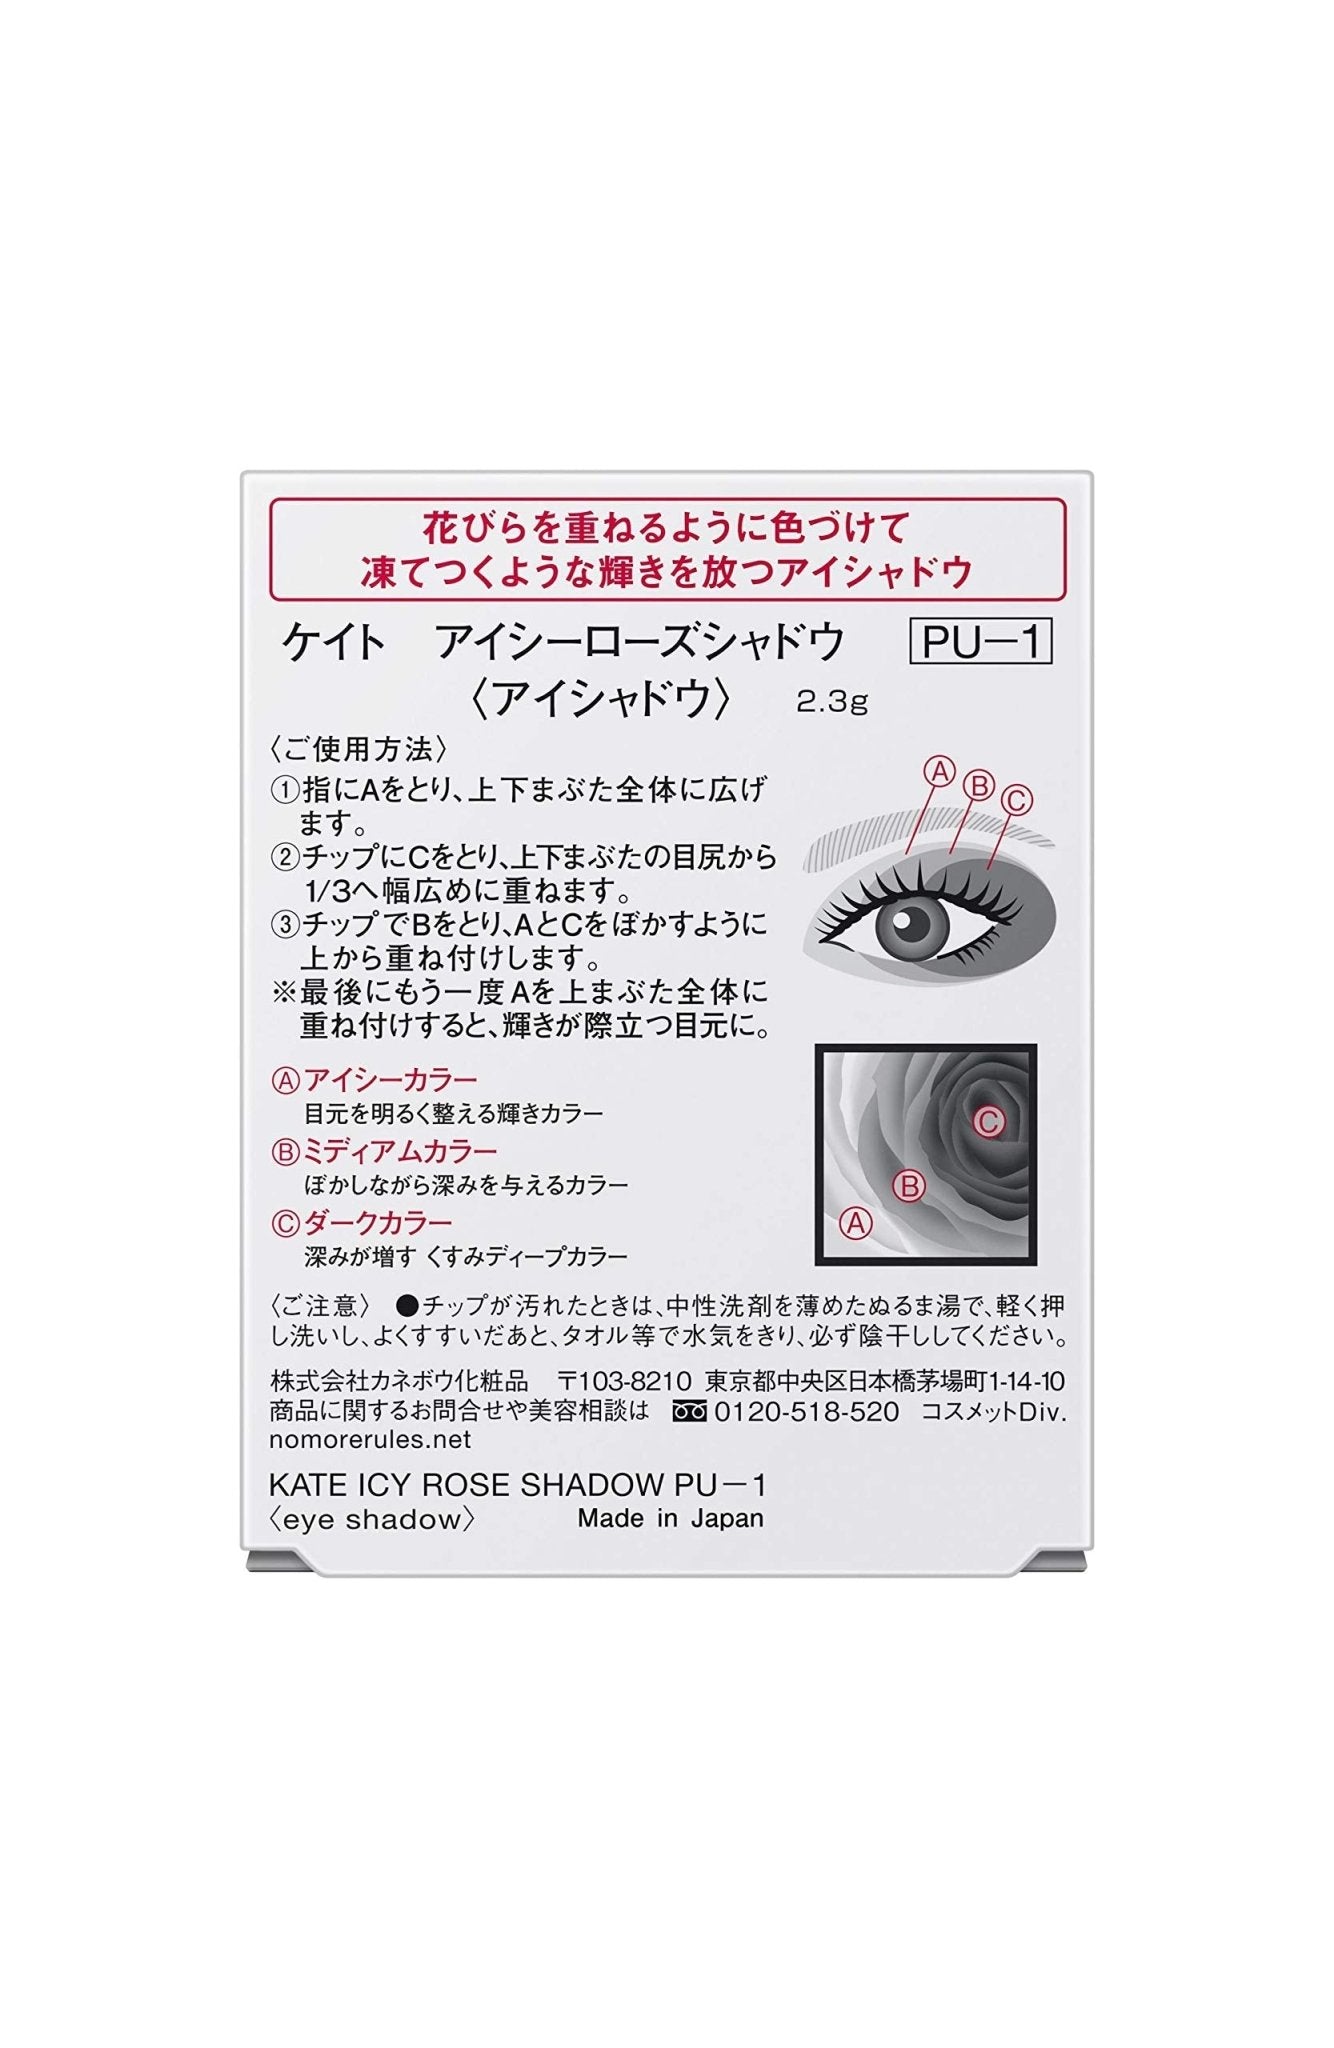 Kate Icy Rose Shadow PU - 1 2.3G - High Pigment Eye Shadow by Kate